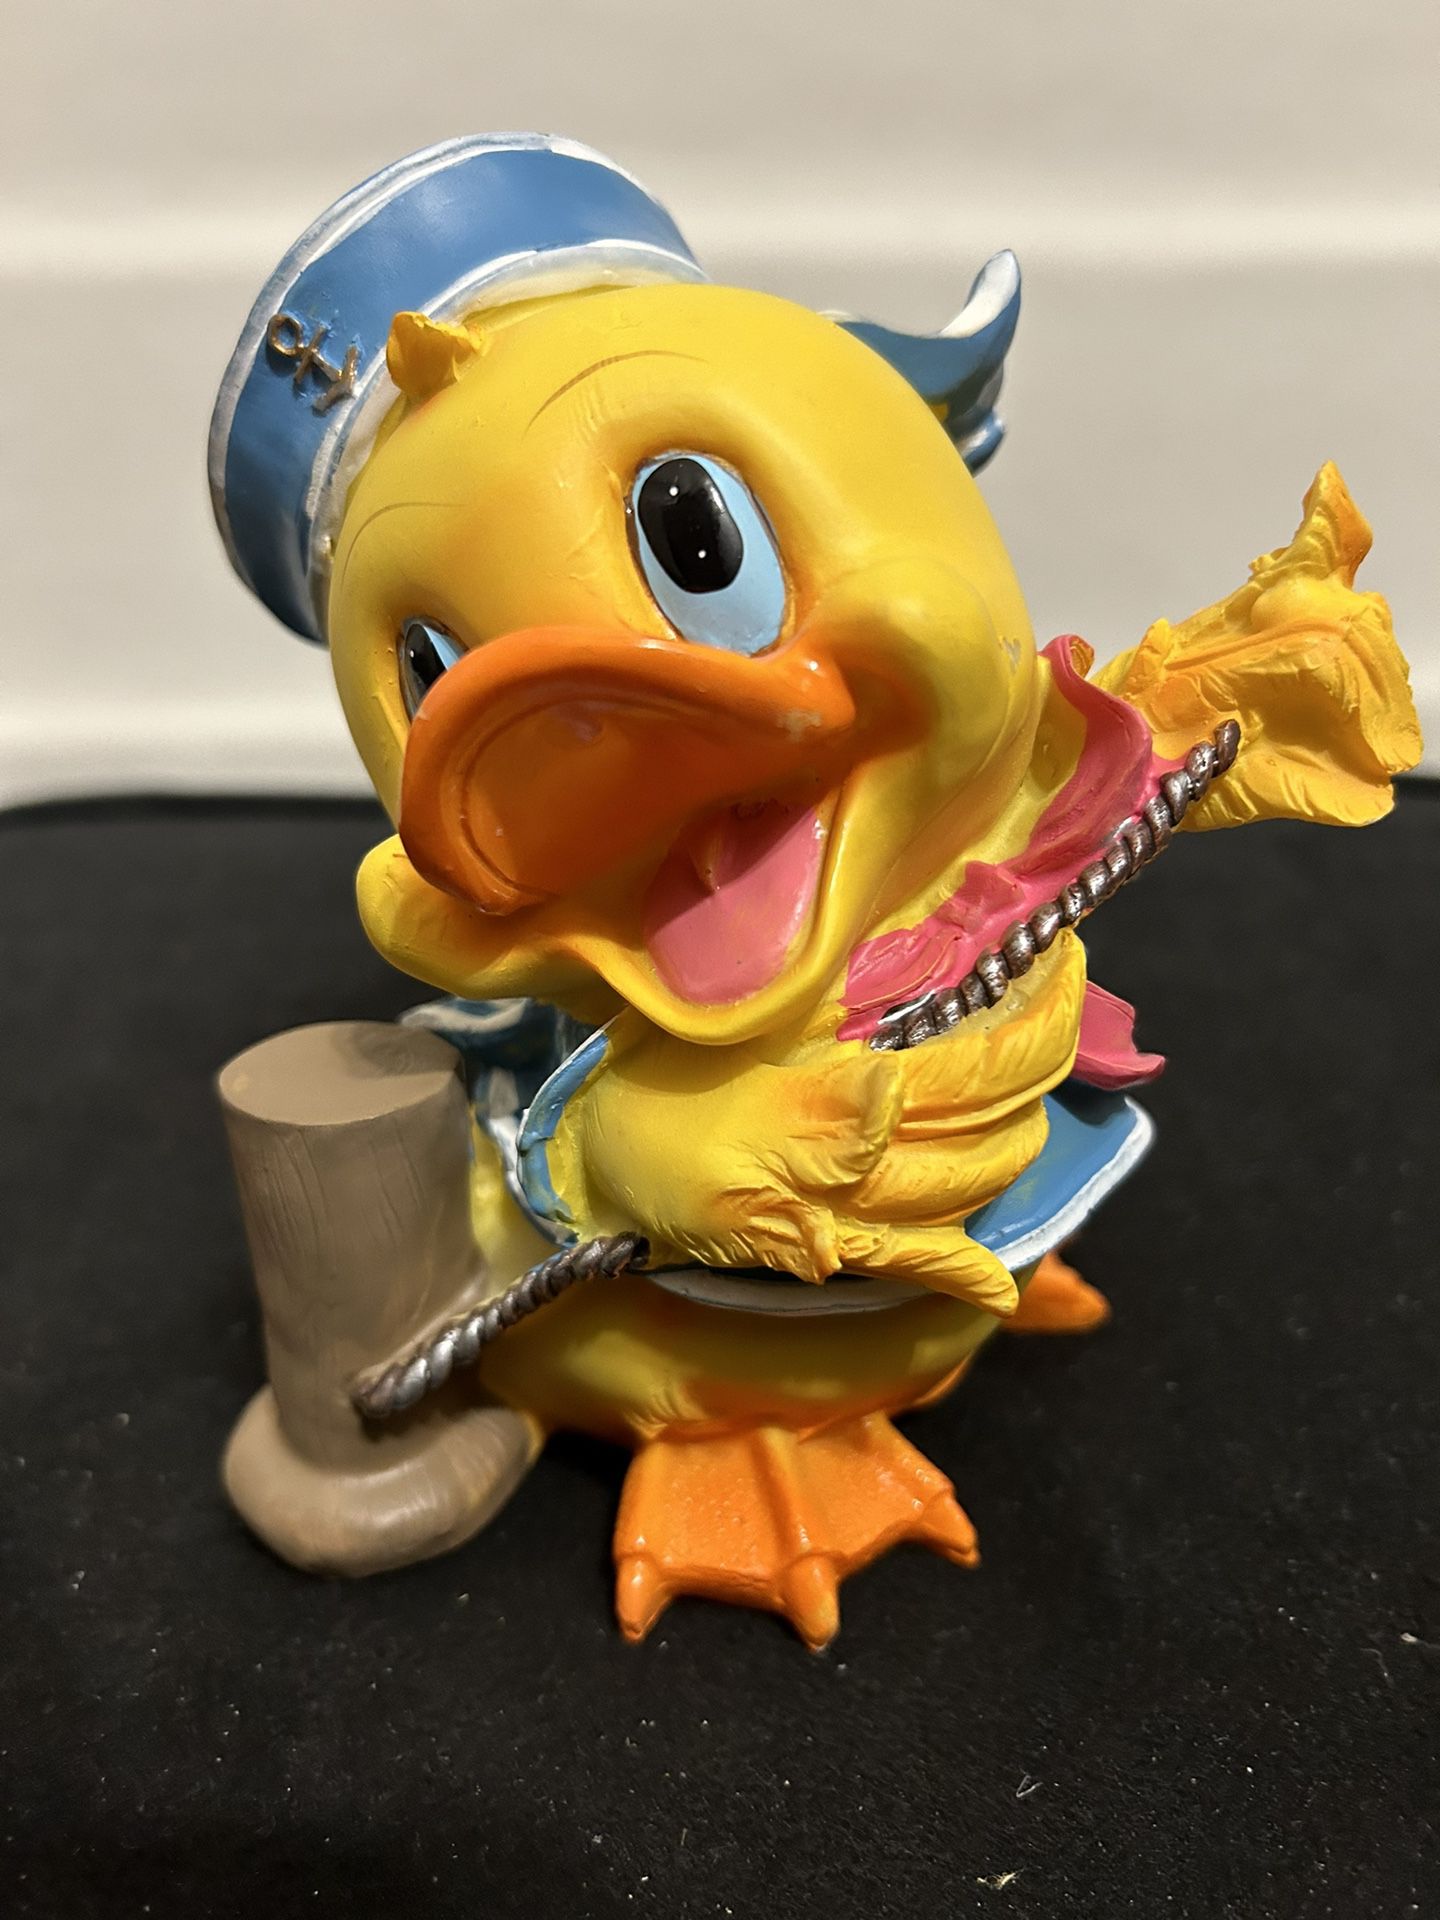 Vintage Sailor Ducky With Boat Dock Bumper, That’s A Coin Bank With Stopper Bottom, Made Of Hard Plastic